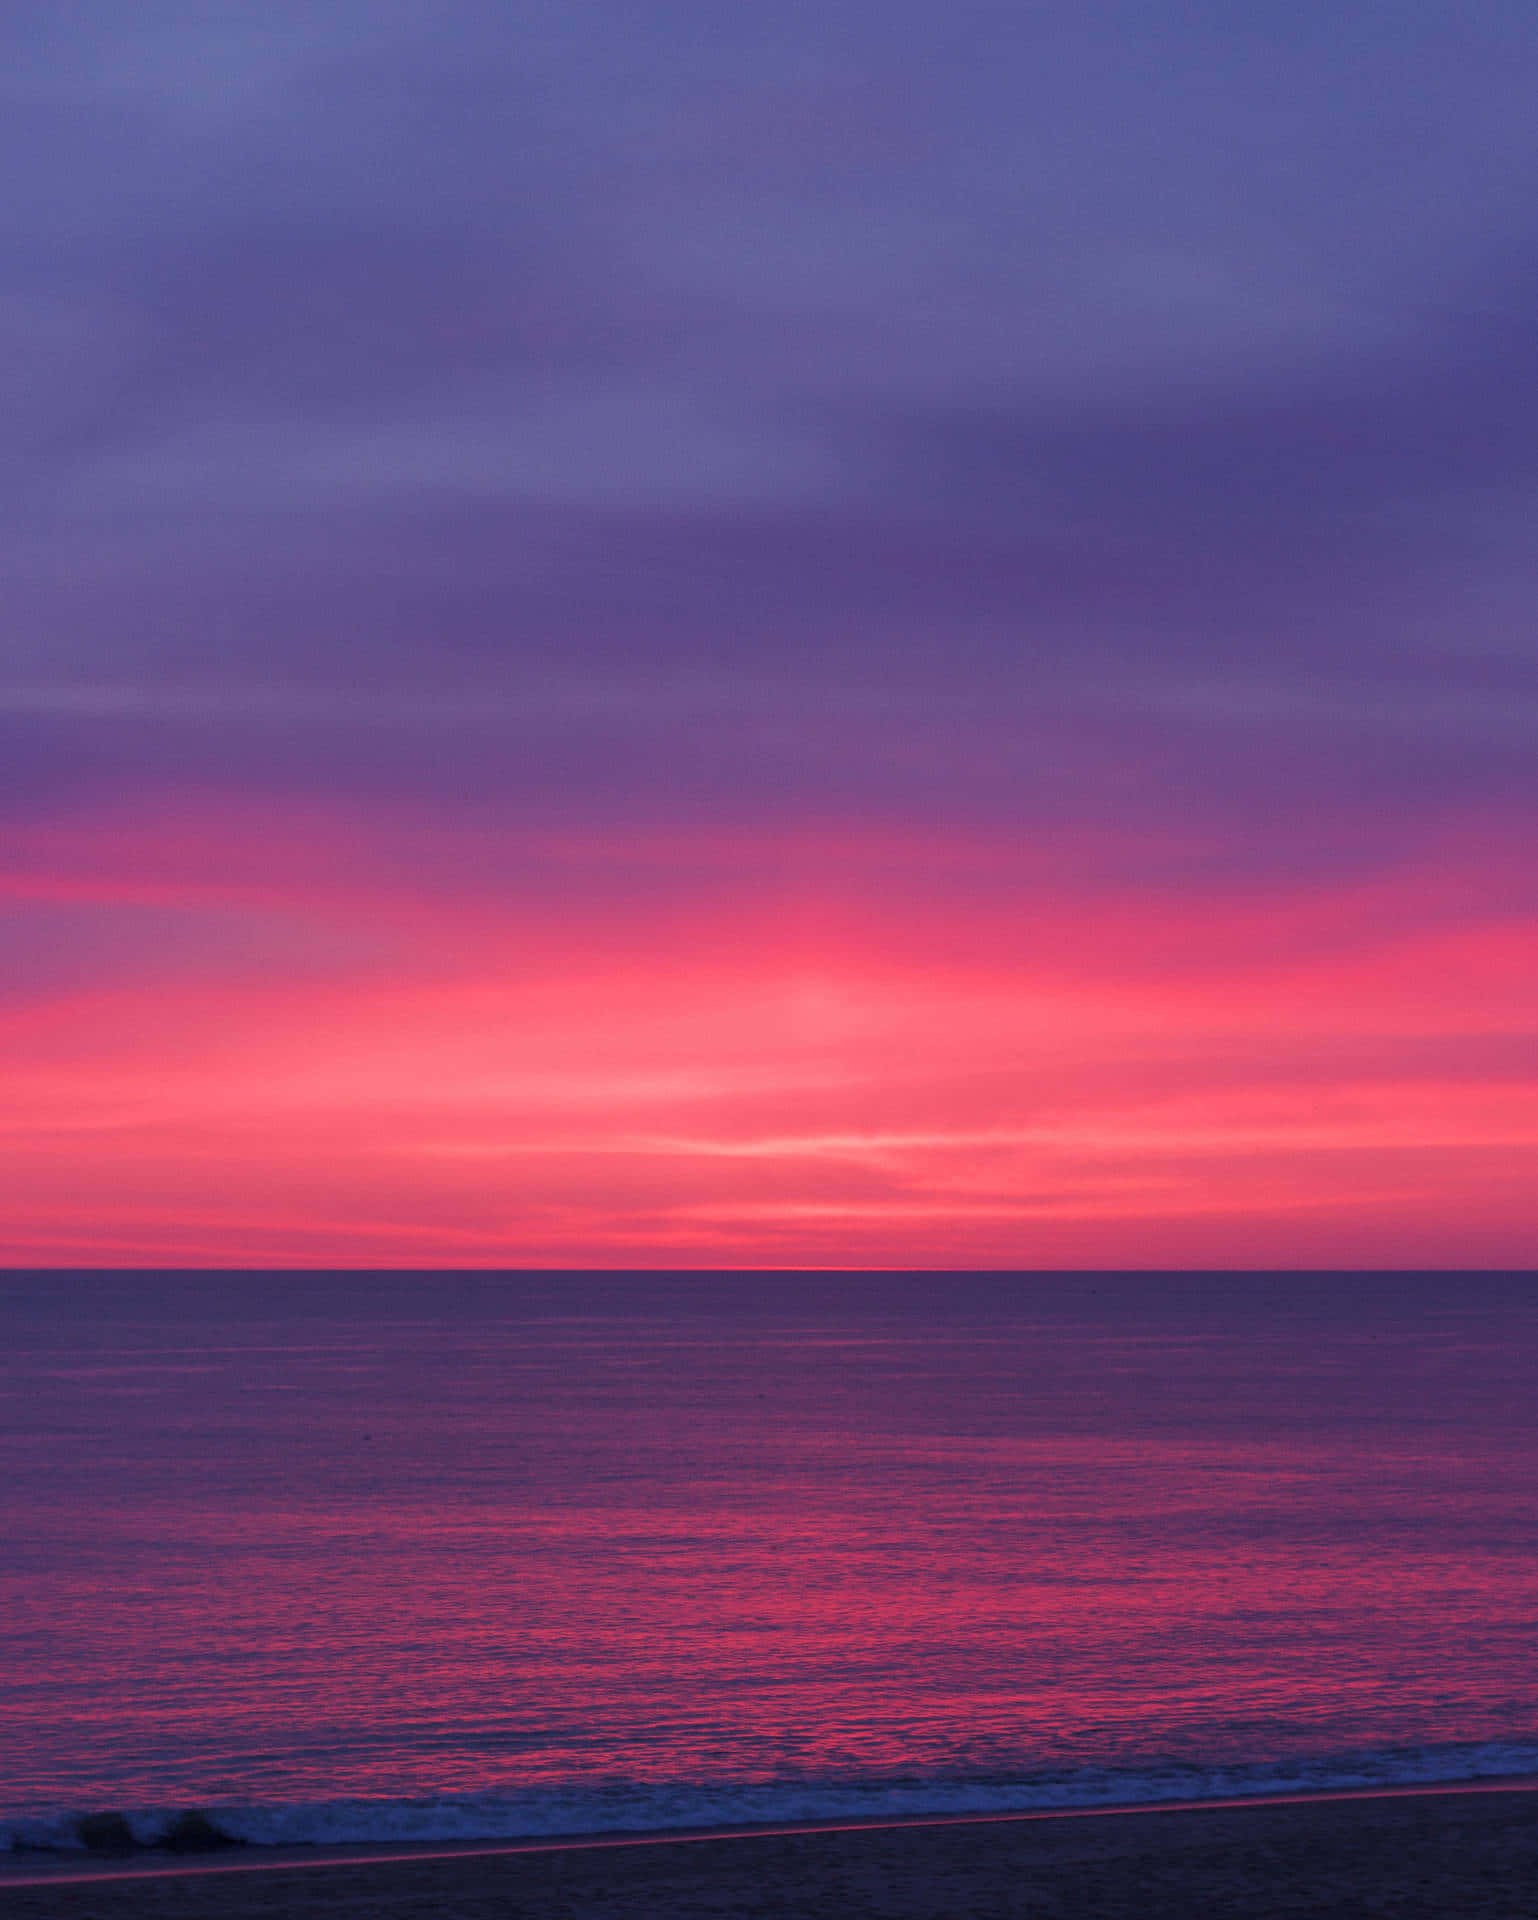 Feel the warmth of the setting sun on a beautiful pink beach Wallpaper